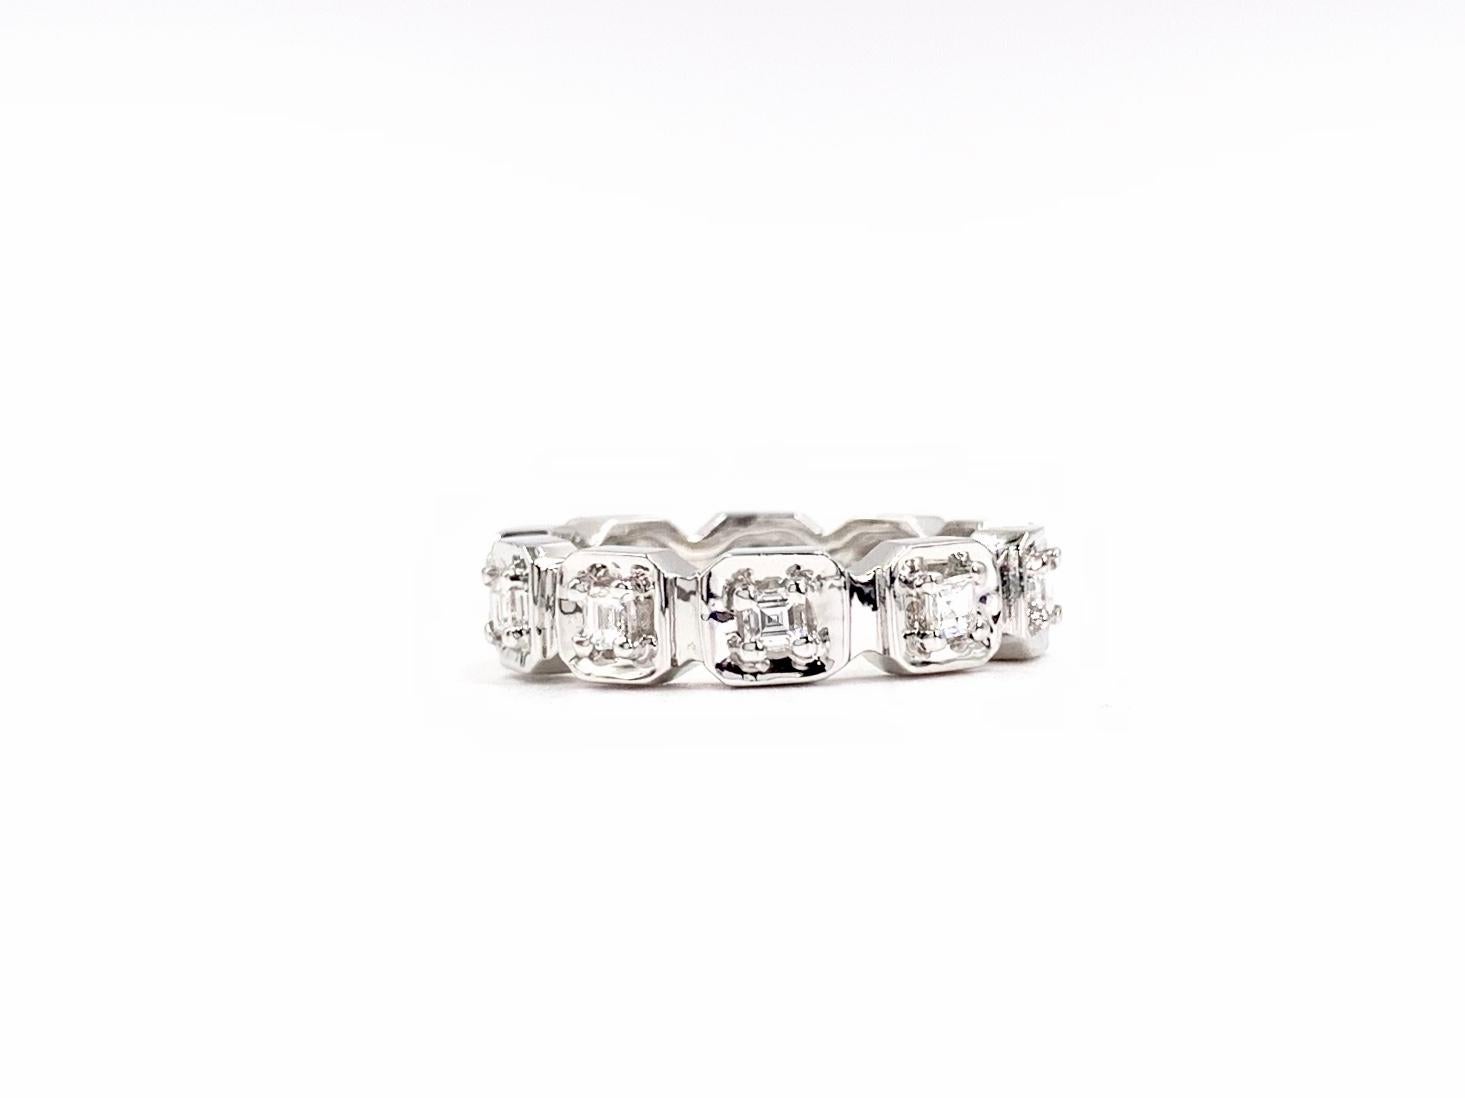 18 Karat polished white gold geometric diamond band featuring 10 petite asscher cut diamonds at .60 carats total weight, crafted by Martin Flyer. Diamond quality is approximately G color, VS2 clarity (near colorless, eye clean). At a 5mm width this